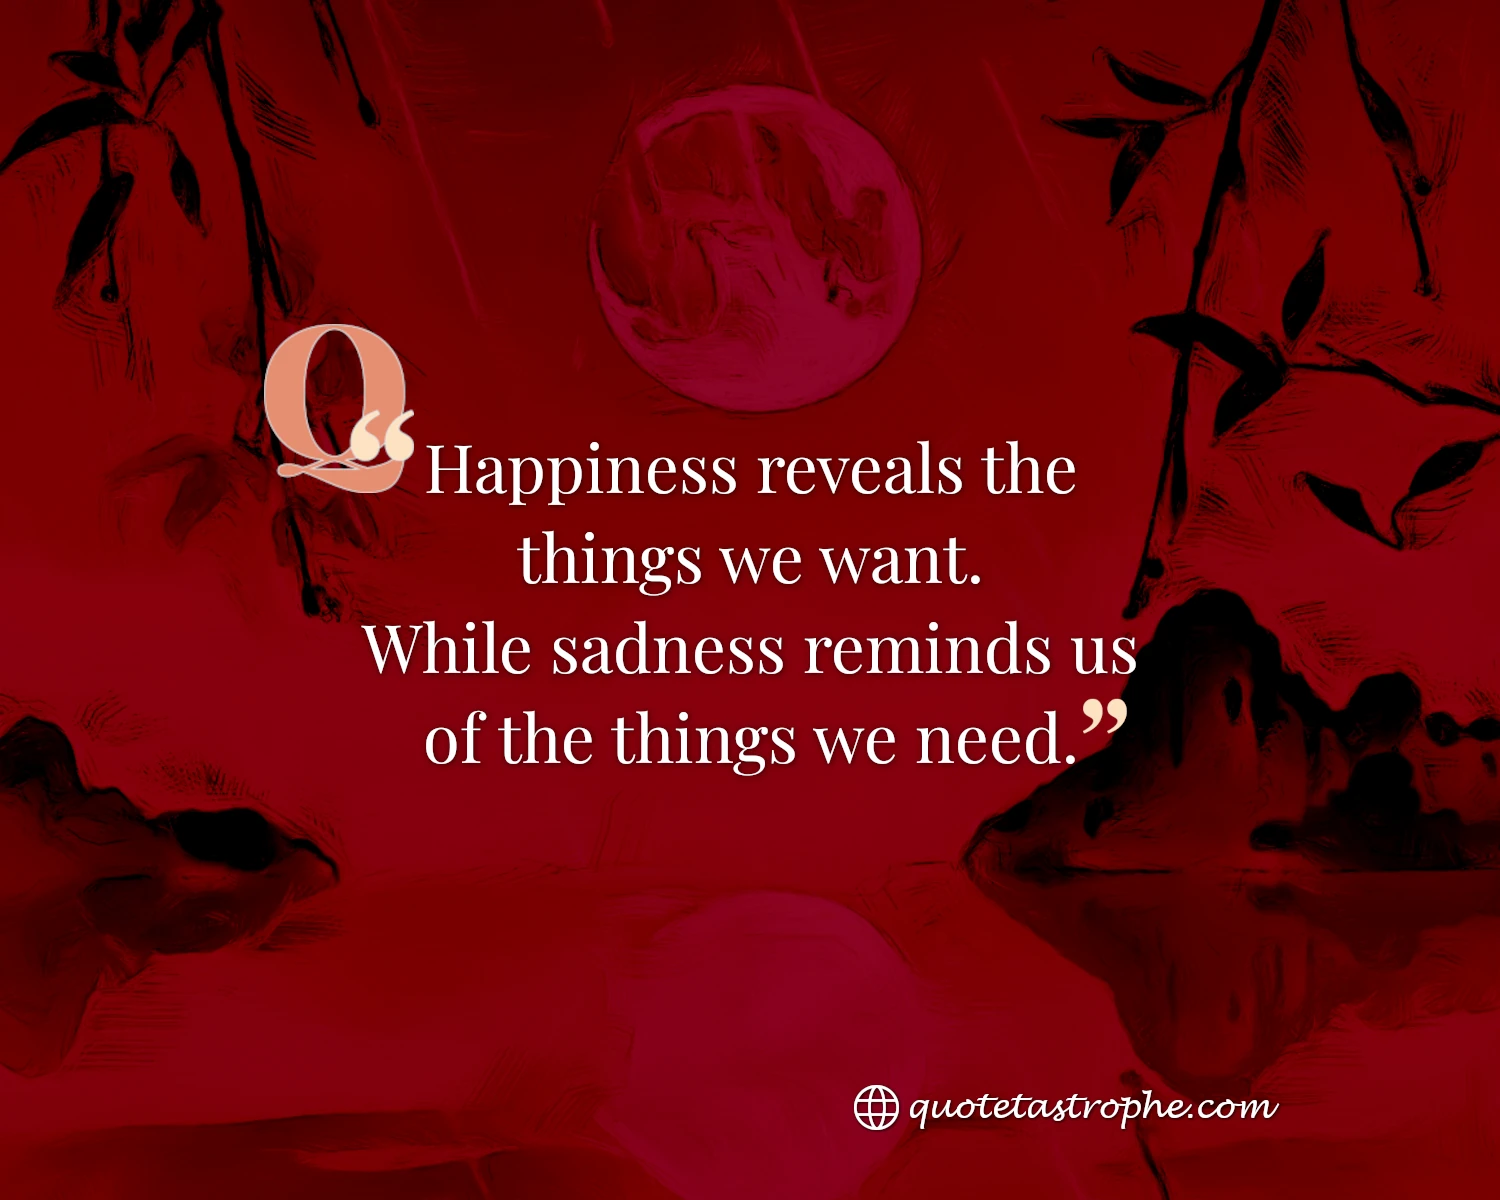 Happiness Reveals What We Want Sadness Reminds What We Need